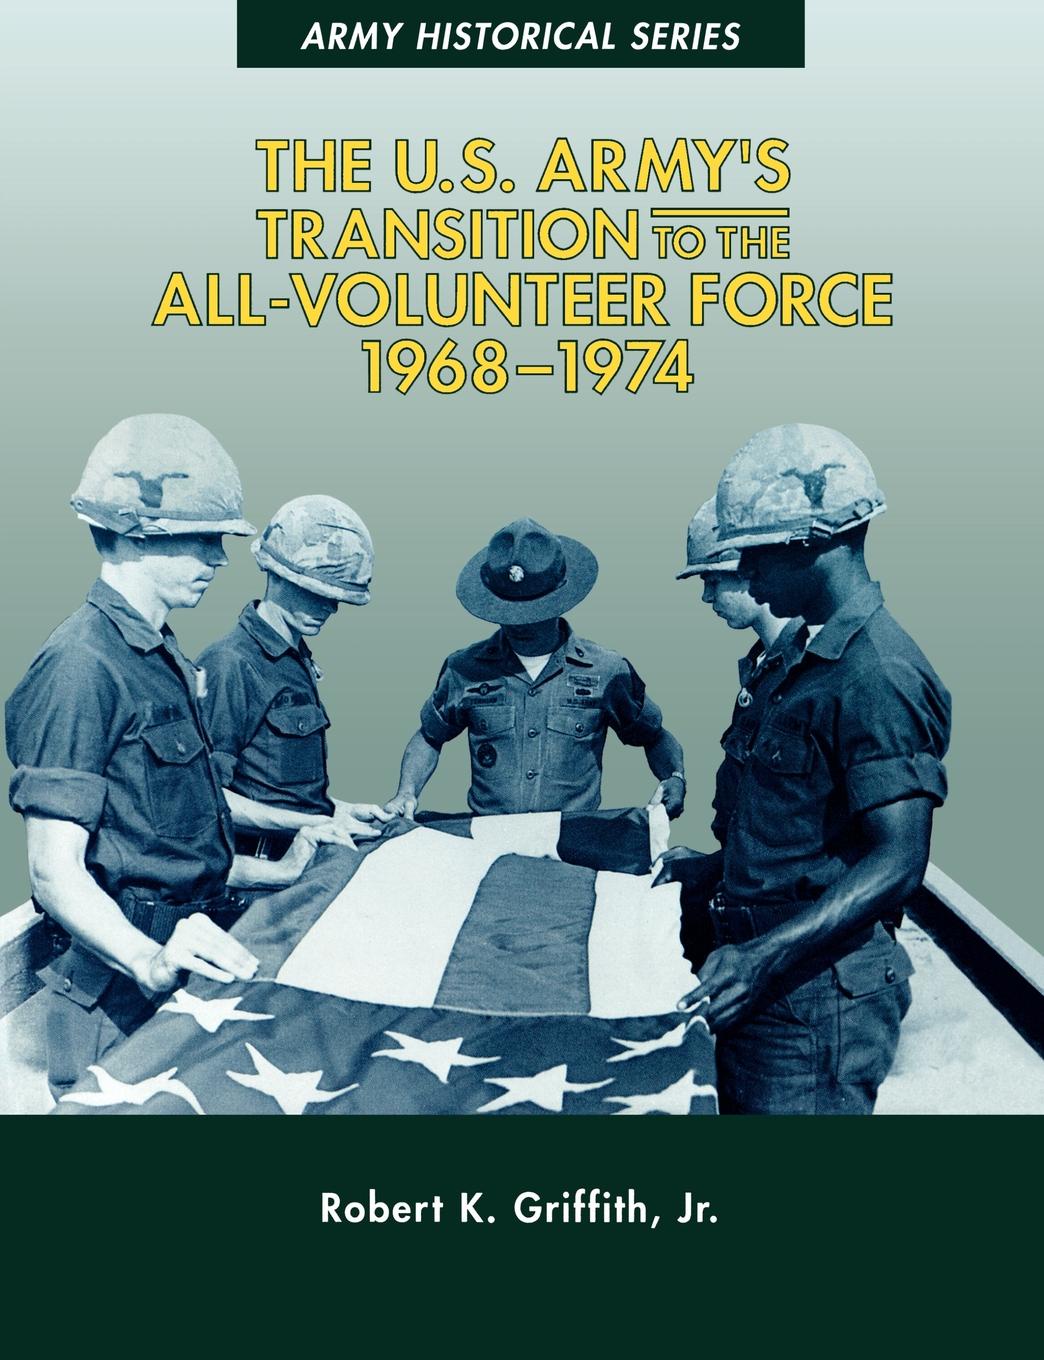 The U.S. Army.s Transition to the All-Volunteer Force, 1968-1974